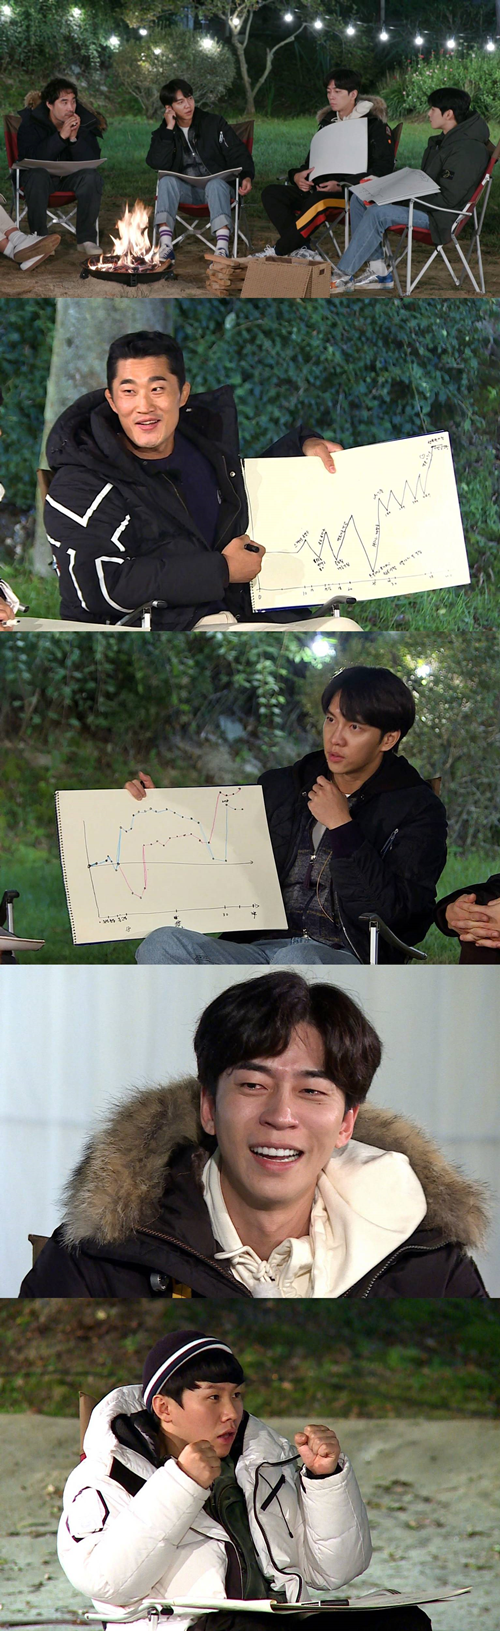 All The Butlers Lee Seung-gi reveals life graph.In the SBS entertainment program All The Butlers, which will be broadcast on the 25th, life graphs of Bae Seong-woo and Lee Seung-gi, Yang Se-hyeong, Shin Sung-rok, Cha Eun-woo and Kim Dong-Hyun will be released.When the night of camping ripe, Bae Seong-woo and All The Butlers members shared their lives by drawing life graphs.They draw attention by revealing the graph and saying that they have been openly confident about their life bends.In particular, Shin Sung-rok said, Bae Seong-woo, who was looking at his graph, was really hard and full of fighting.I felt such a feeling and I was so cool and envious. (I have lived hard these days) without knowing who I am, he said. I really lived hard, he said. I miss the past, he said.On the other hand, the next day, according to the proposal of Bae Seong-woo, Lets find out the meaning of the sky, Bae Seong-woo and the members both challenge the paragliding flying in the sky.The life graph, which Bae Seong-woo and members have genuinely Confessions, can be found on All The Butlers, which is broadcasted at 6:25 pm on the 25th.